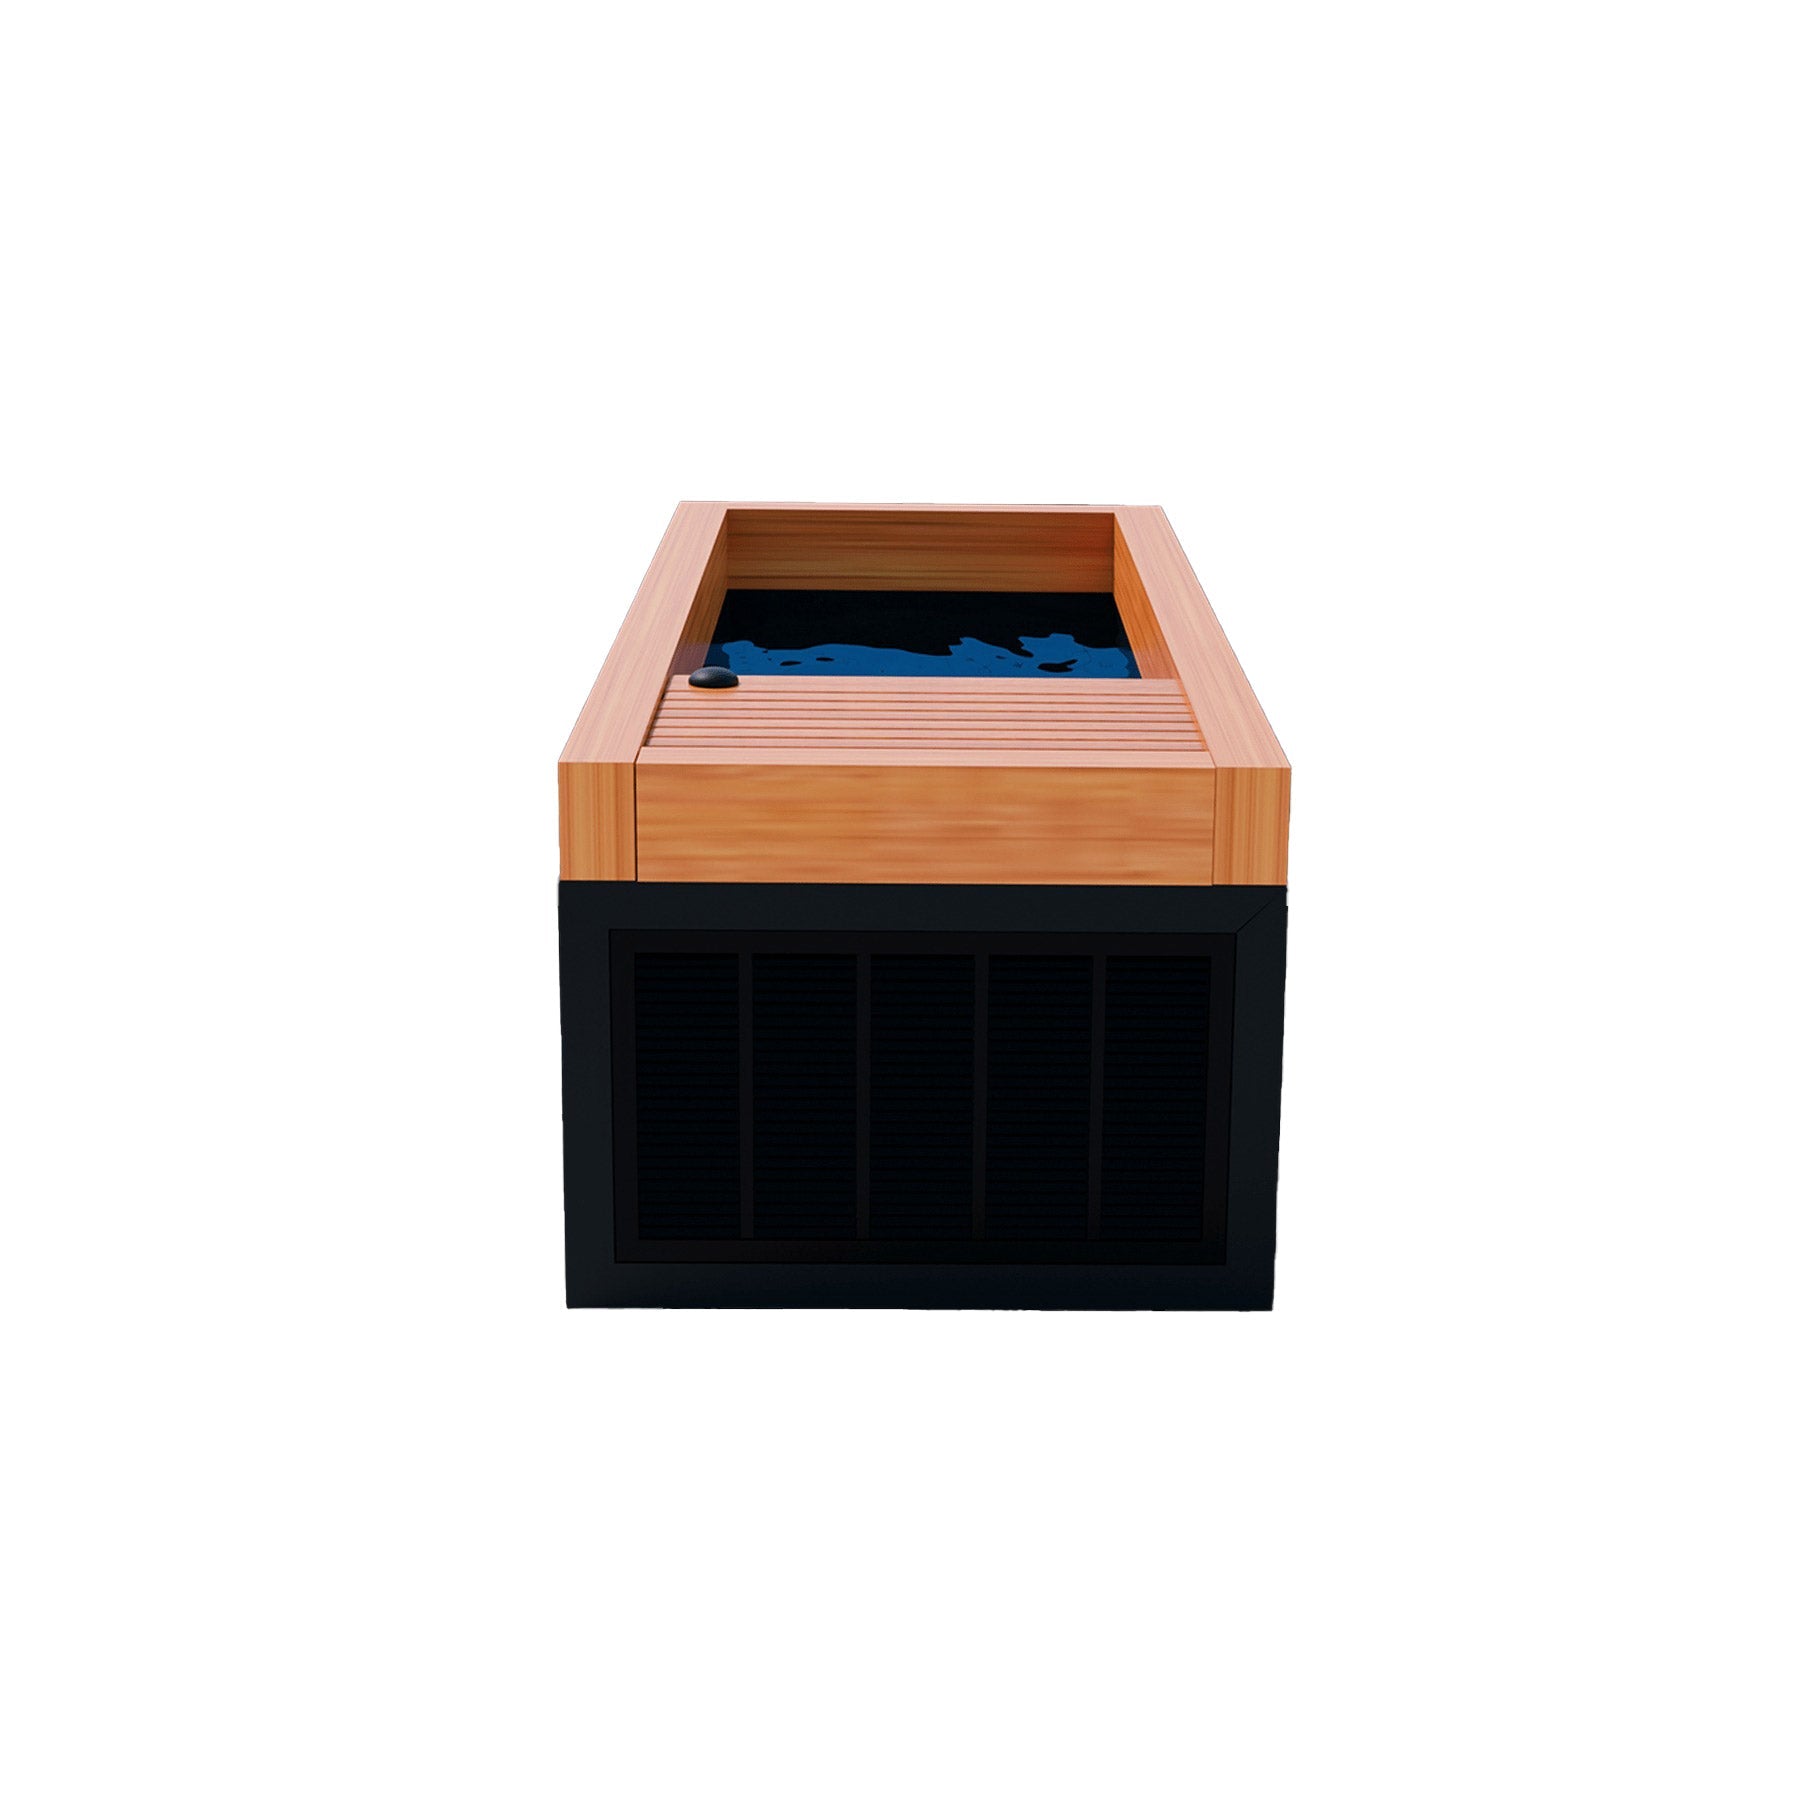 A wooden box with a blue cover on top, perfect for use as a Medical Frozen 4 Cold Plunge or a Steam Generator by Medical Sauna.